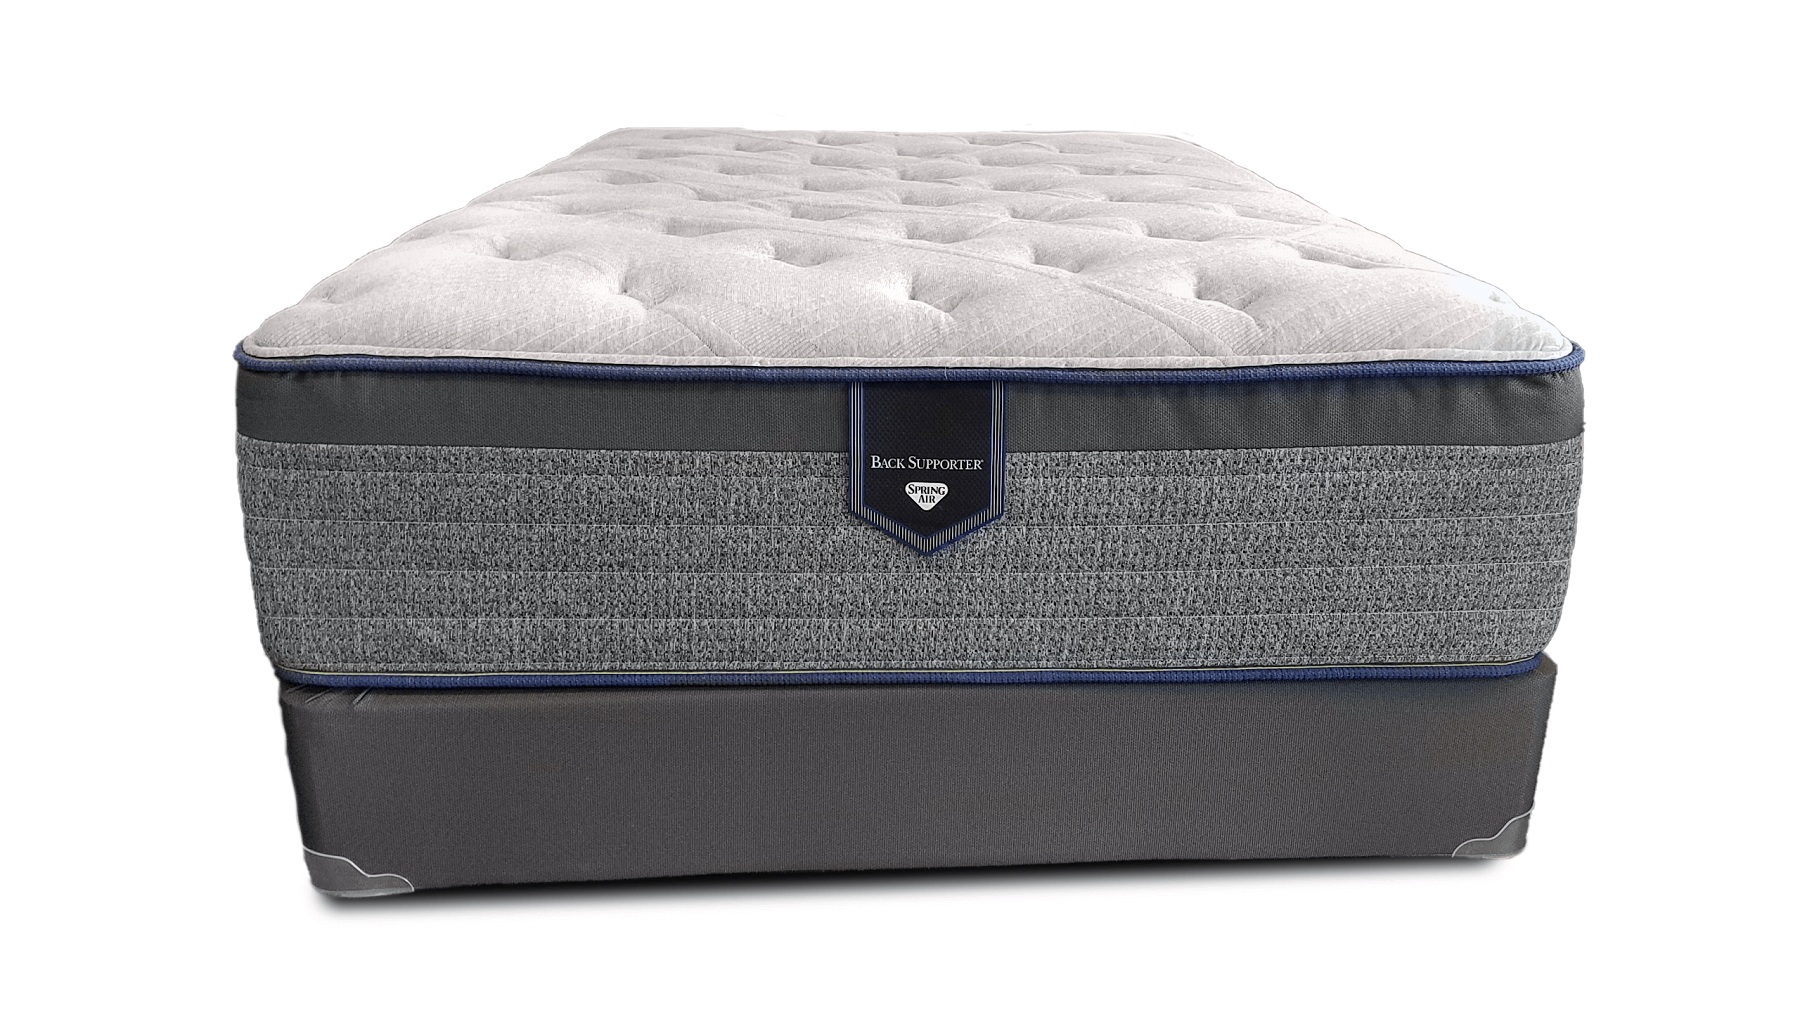 spring air back support royalty mattress